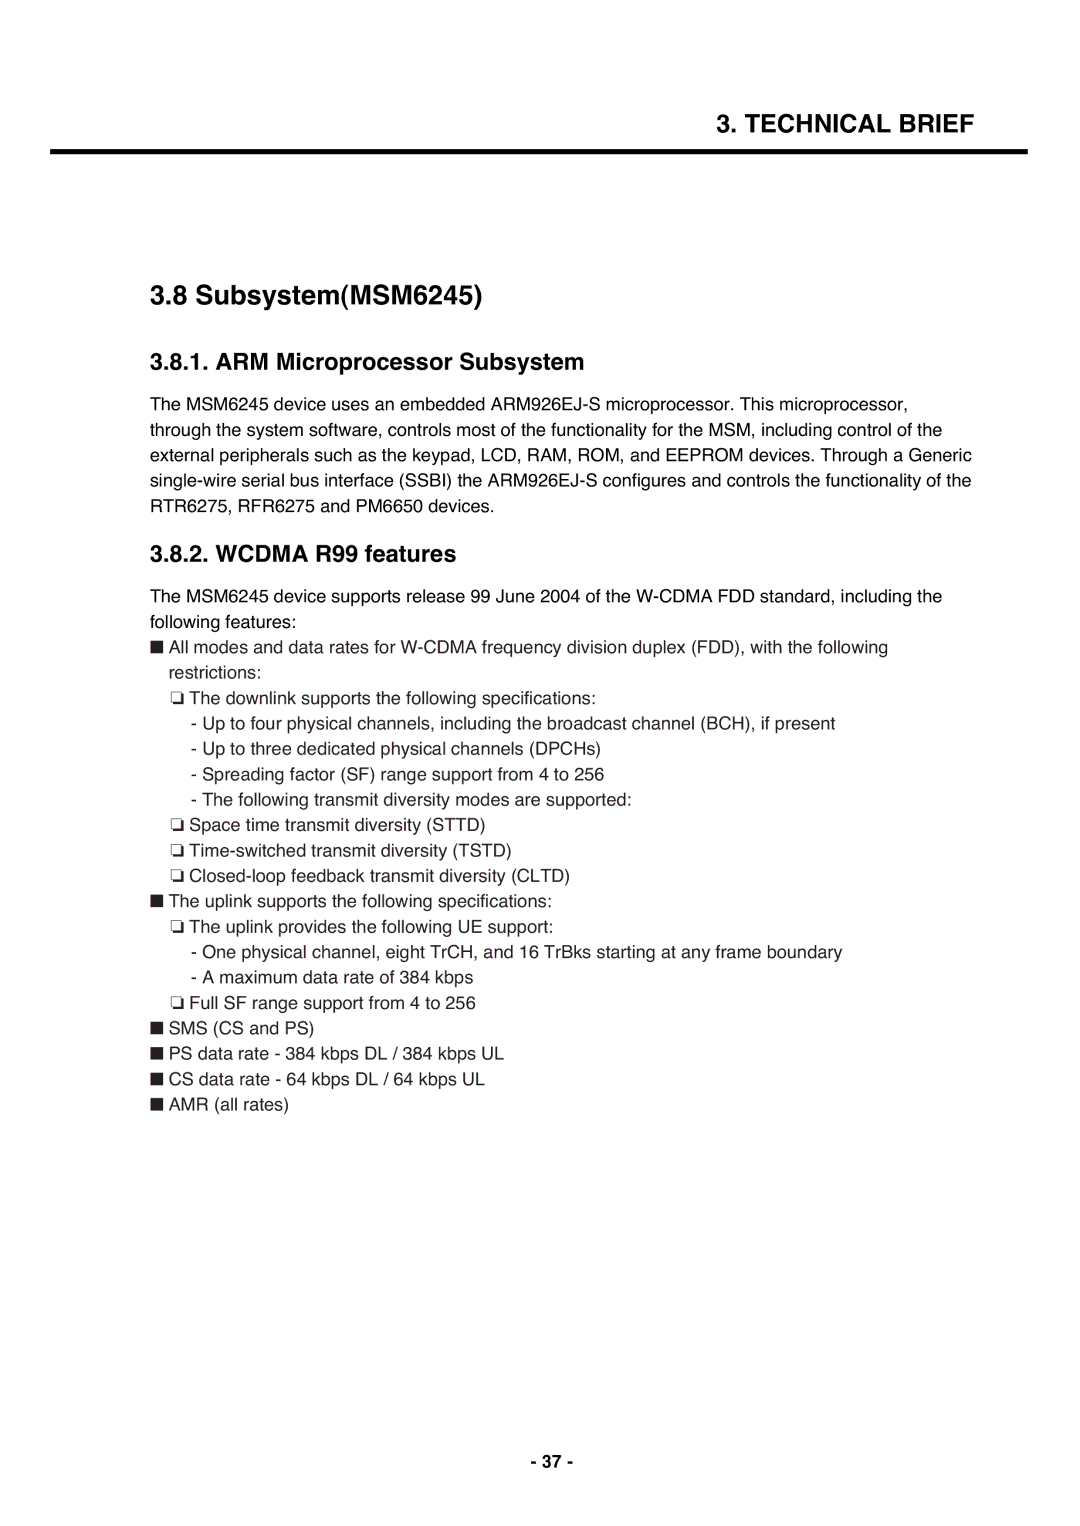 LG Electronics U250 service manual SubsystemMSM6245, ARM Microprocessor Subsystem, Wcdma R99 features 